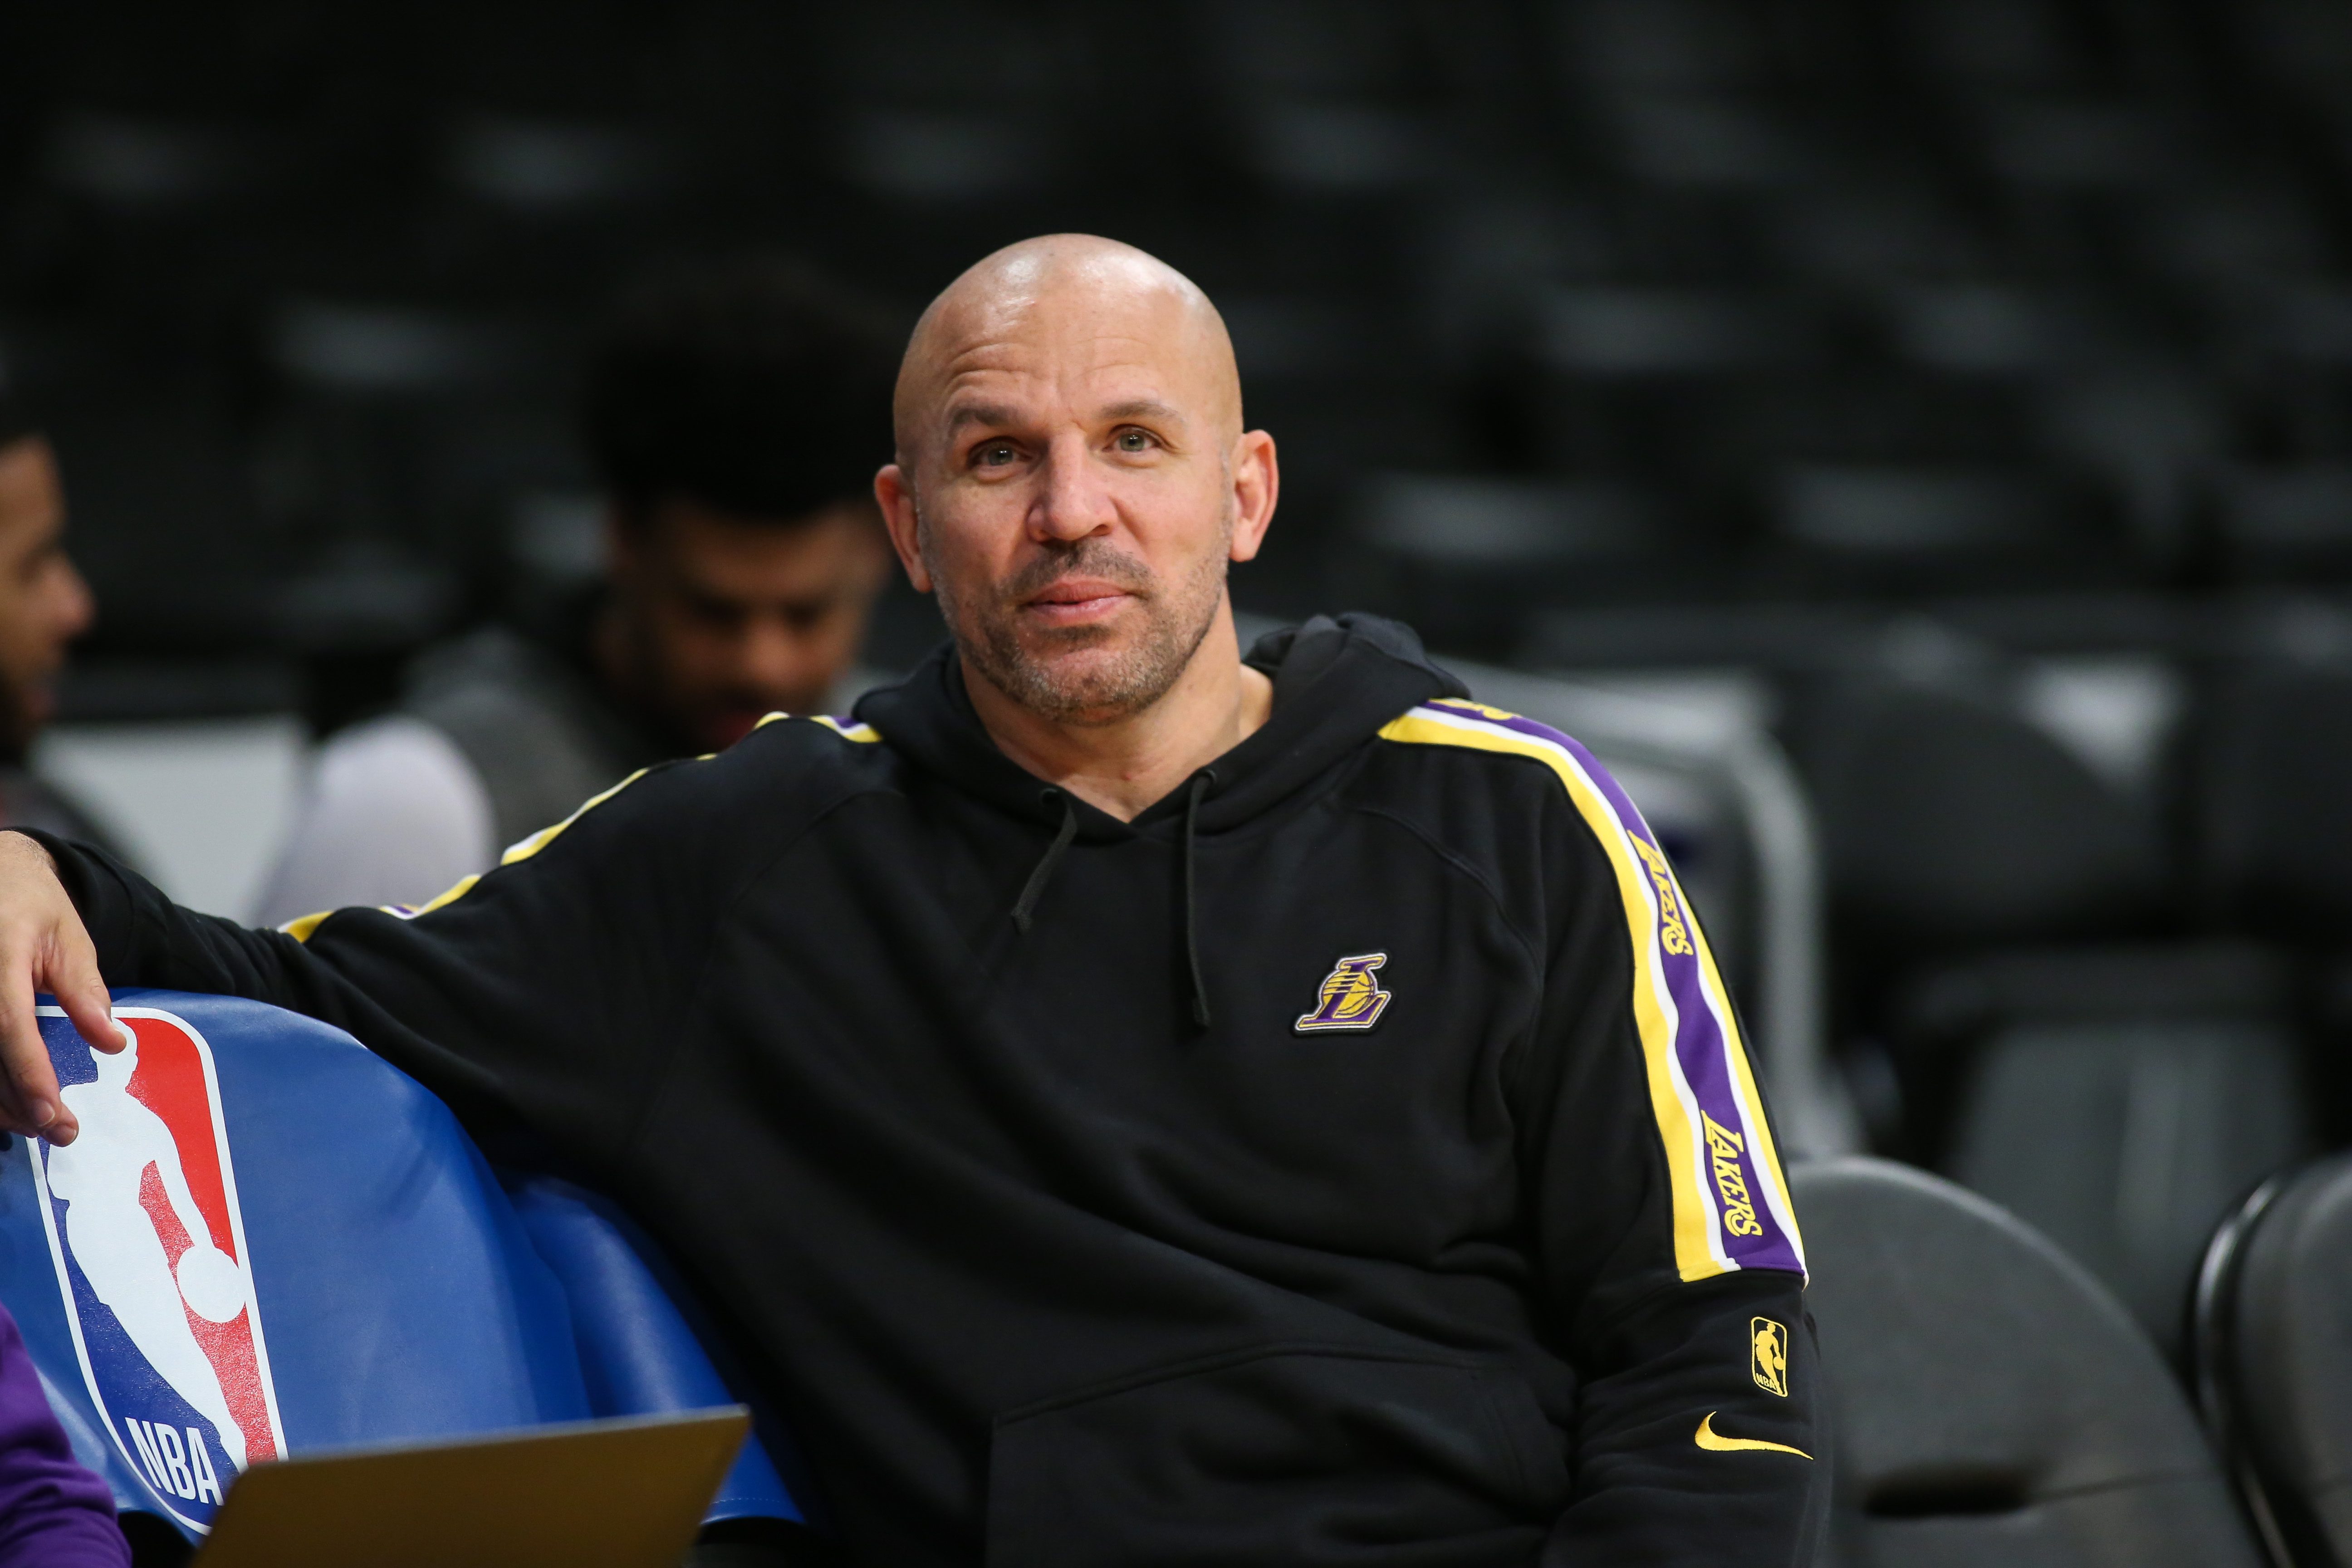 New Dallas Mavericks head coach Jason Kidd in 2020 when he worked with the Los Angeles Lakers.